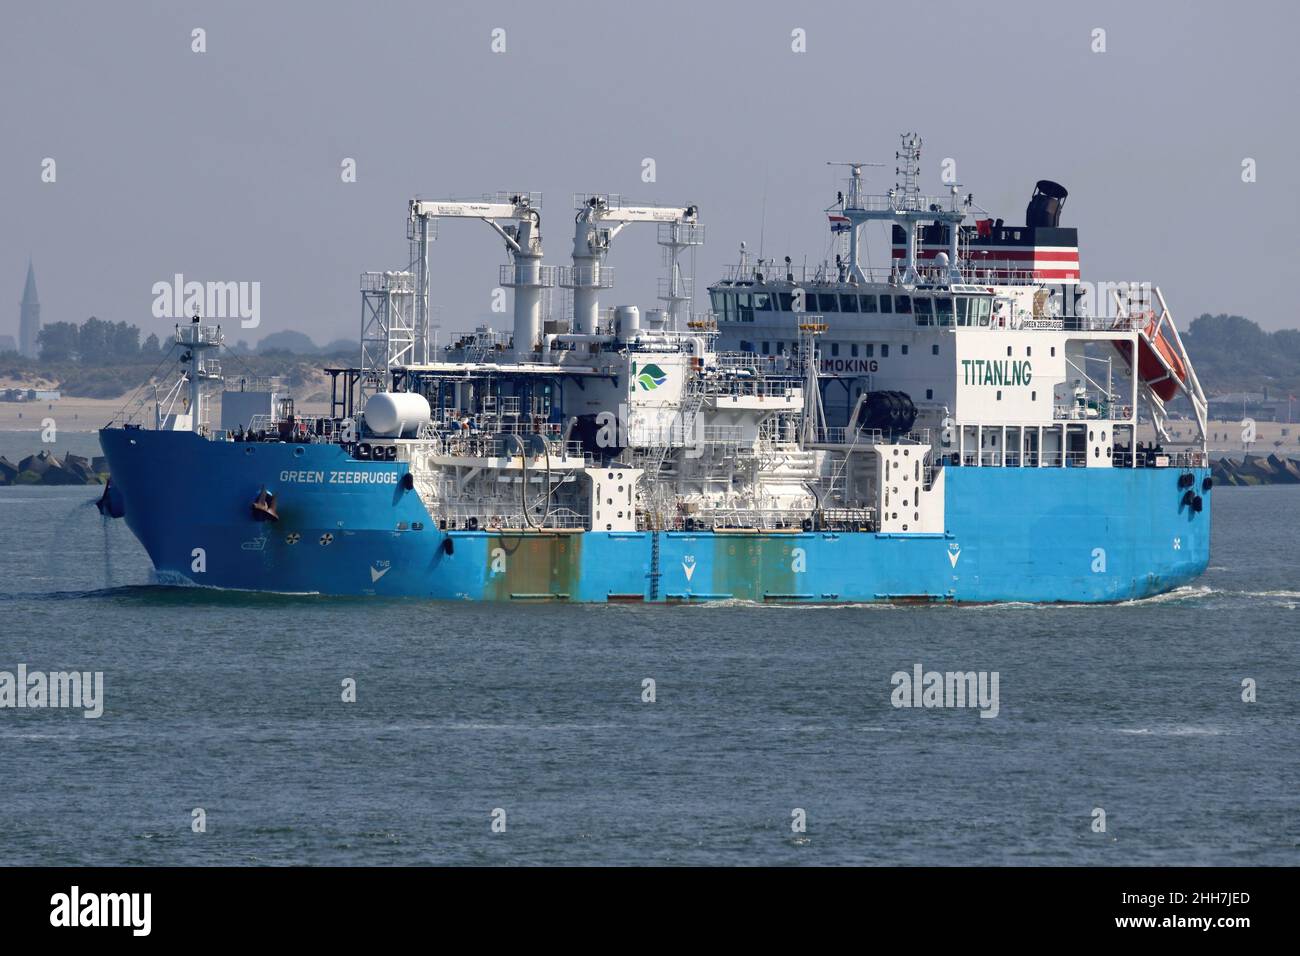 The LNG tanker Green Zeebrugge will leave the port of Rotterdam on September 4, 2021. Stock Photo